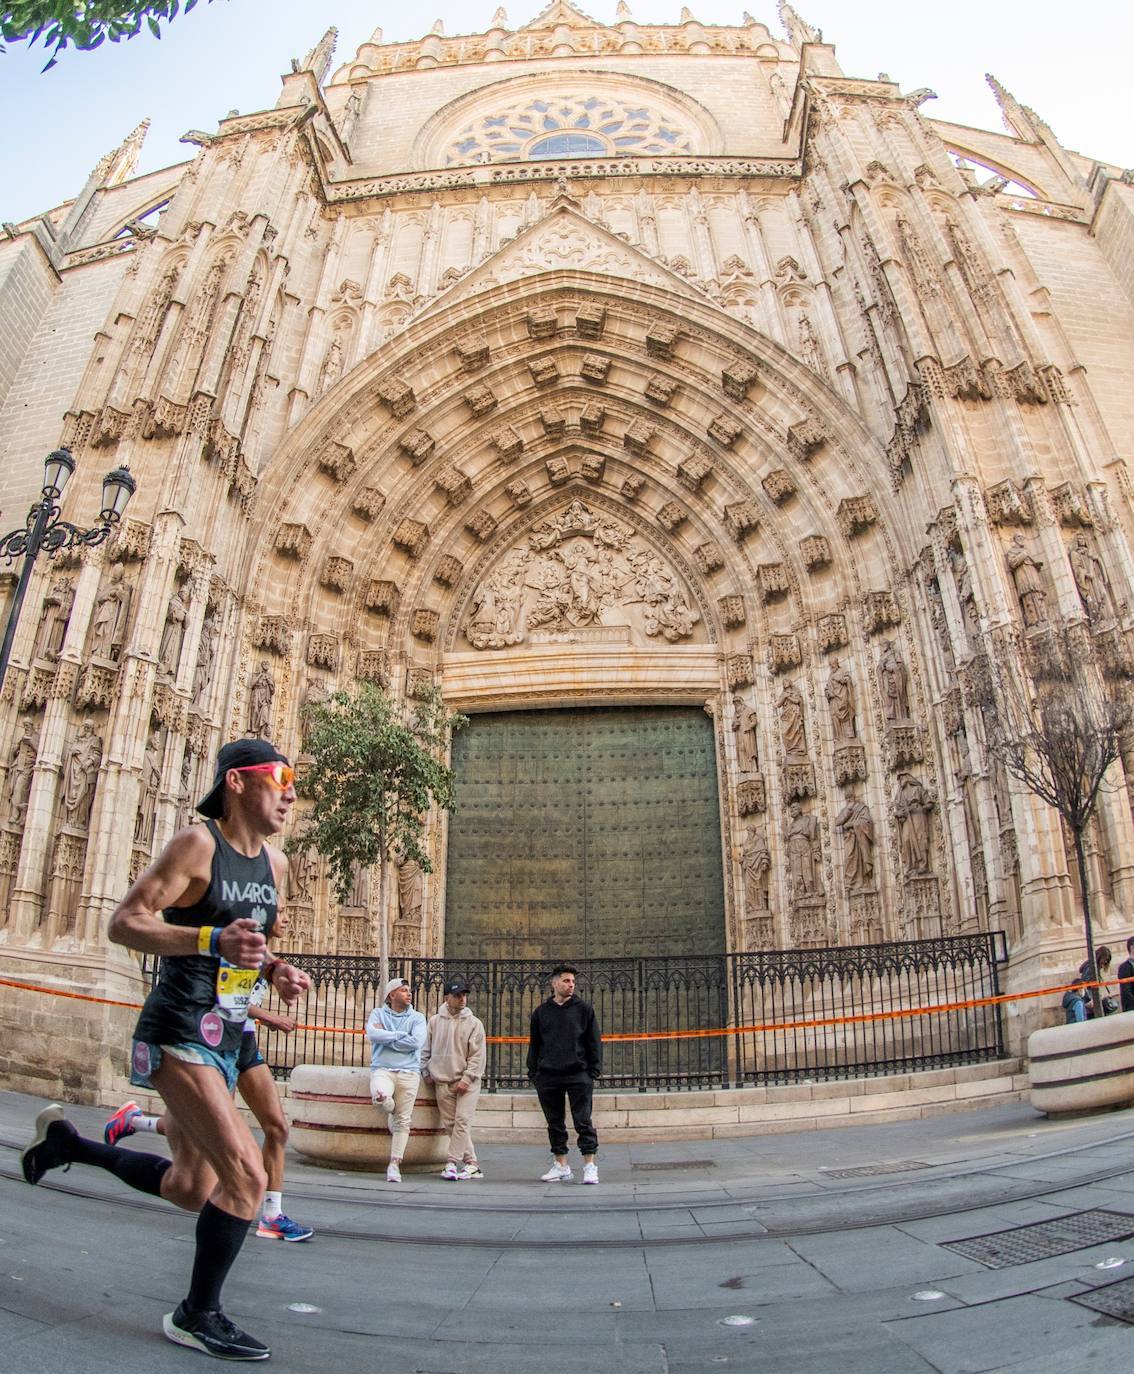 Imagen secundaria 2 - From top: Runners in the Ronda 101km in the famous bullring, Ultra Sierra Nevada competitors at the ski resort and a runner in the Seville marathon passes the iconic cathedral.